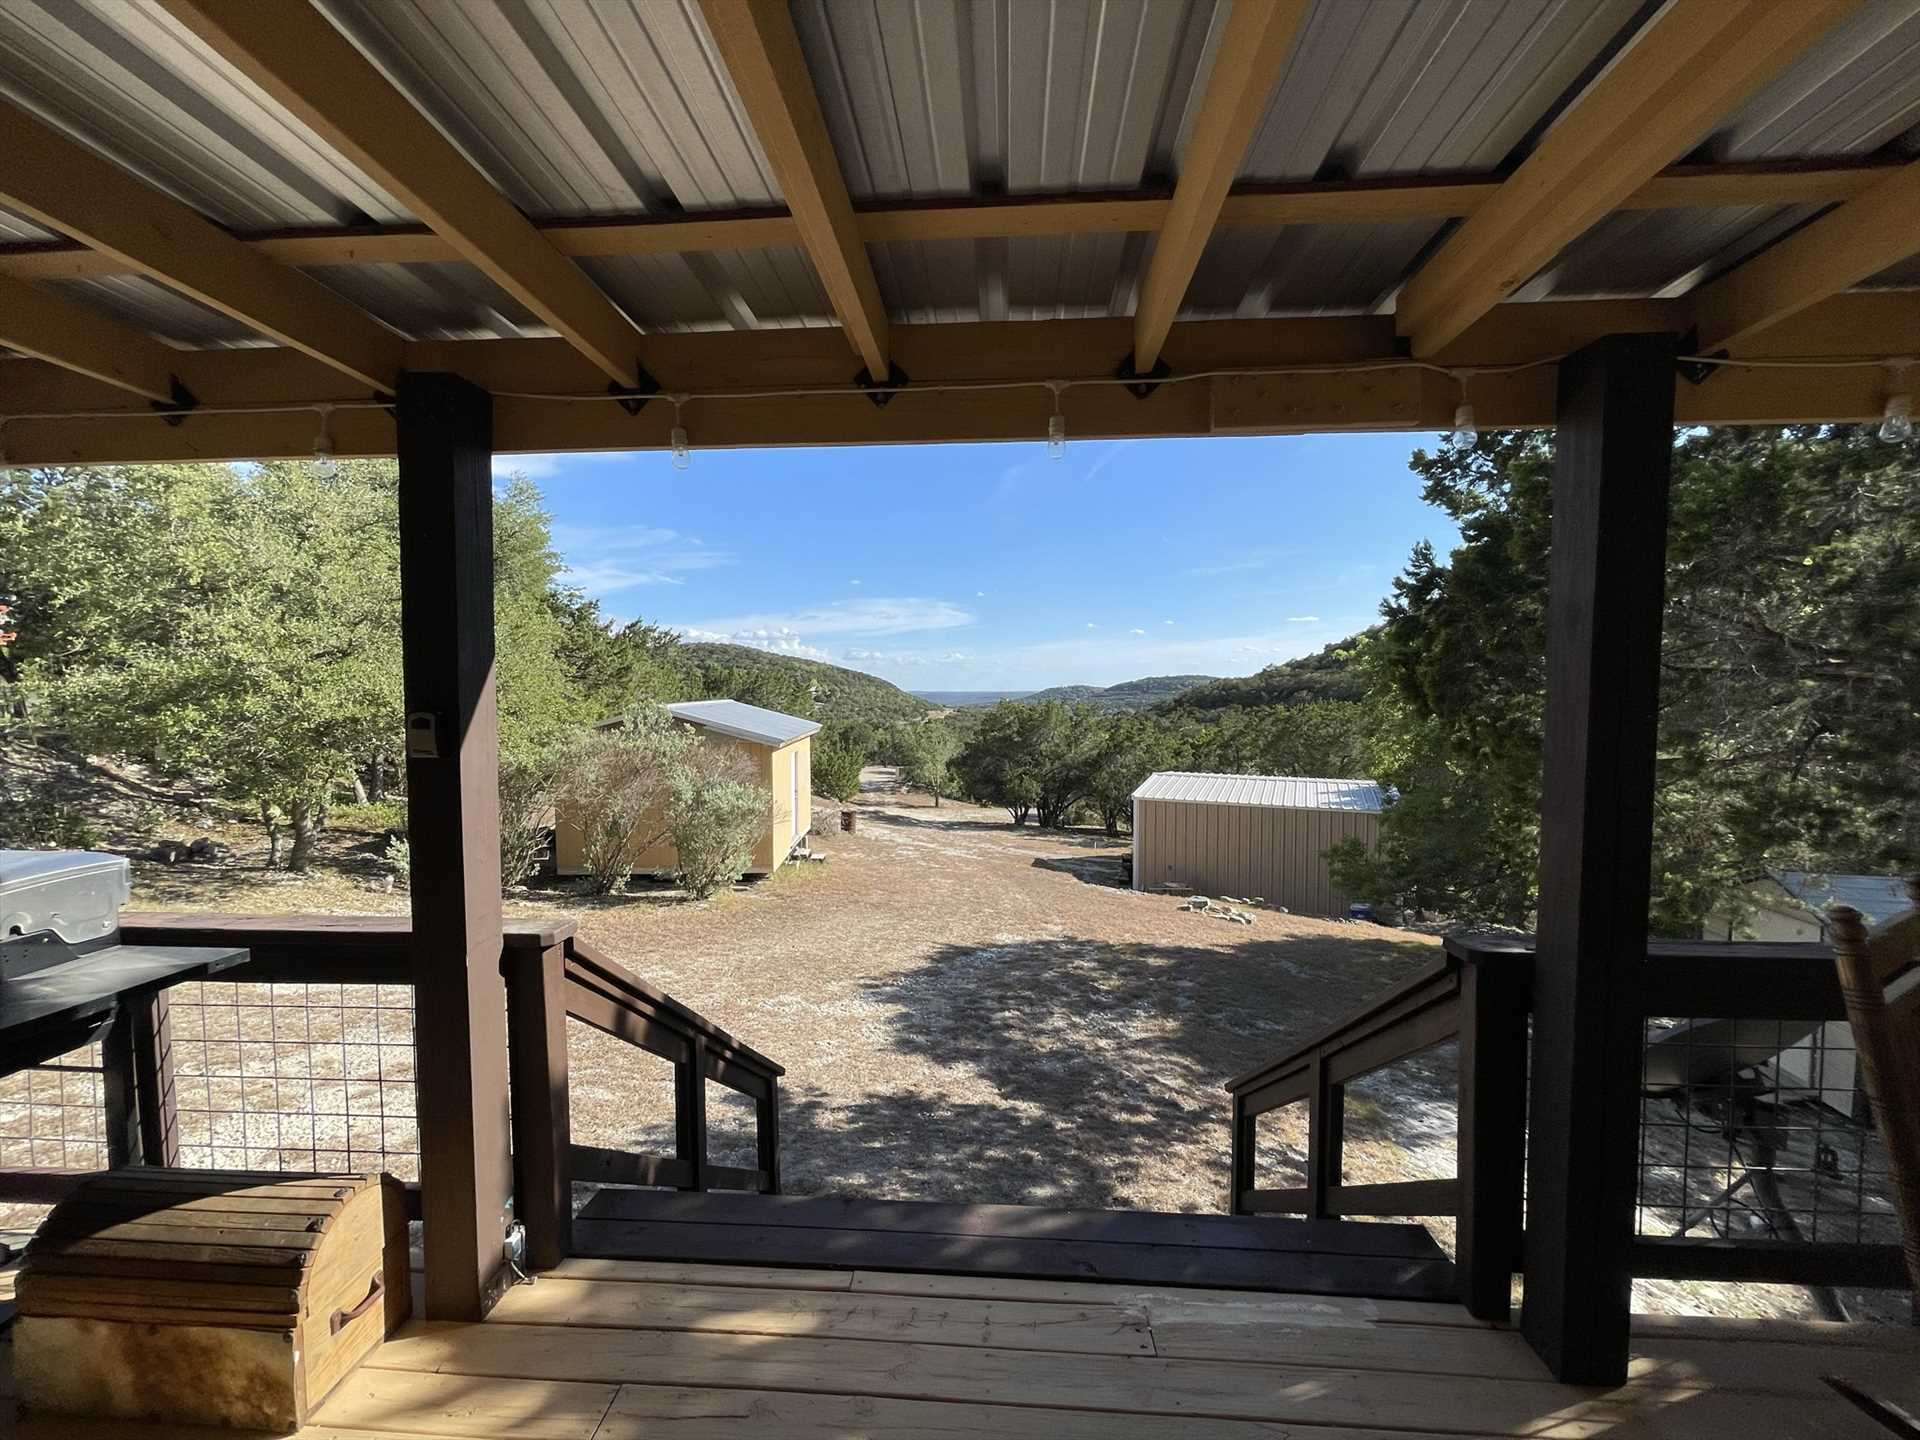                                                 You won't find a better vantage point for stargazing, mountain views, wildlife watching, and those brilliant Hill Country sunsets!